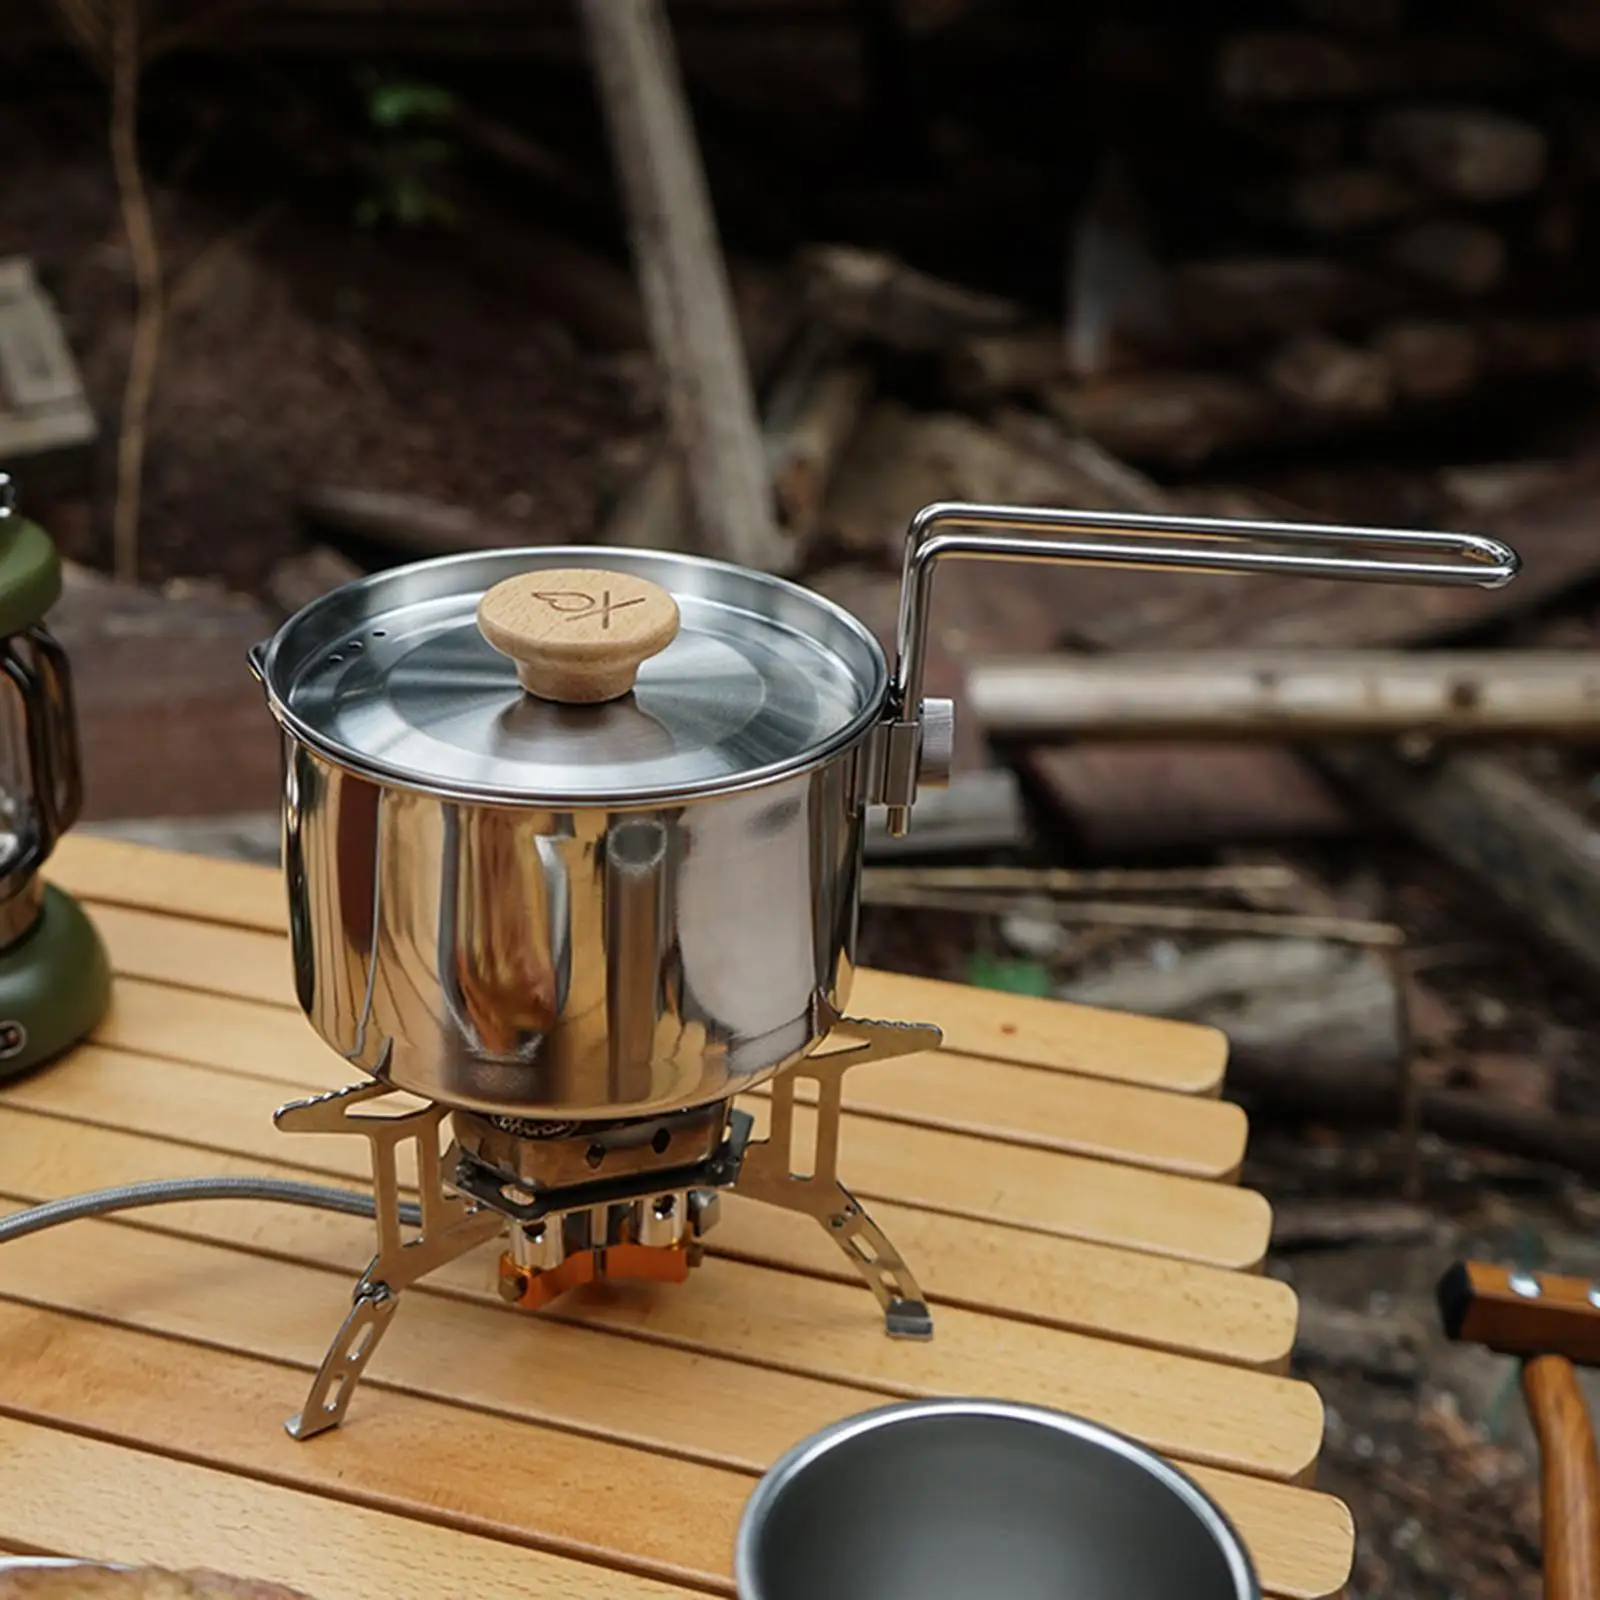 1L Camping Kettle Tea Pot Stainless Steel Cookware with Handle Boiling Water for Backpacking Survival Travel Cooking Supplies